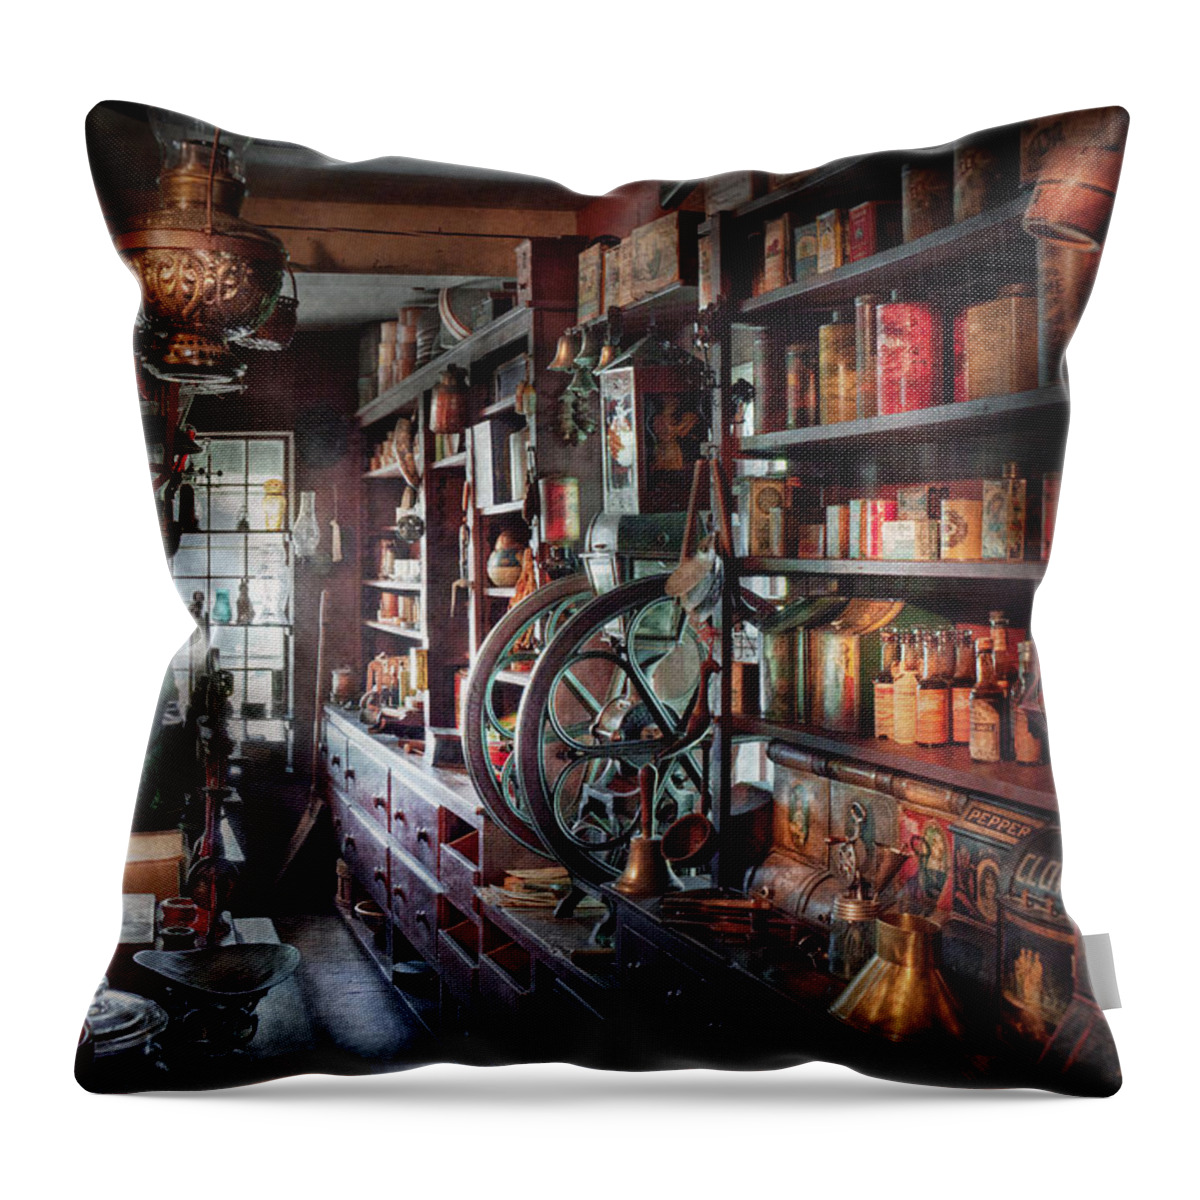 Hdr Throw Pillow featuring the photograph Americana - Store - Corner Grocer by Mike Savad